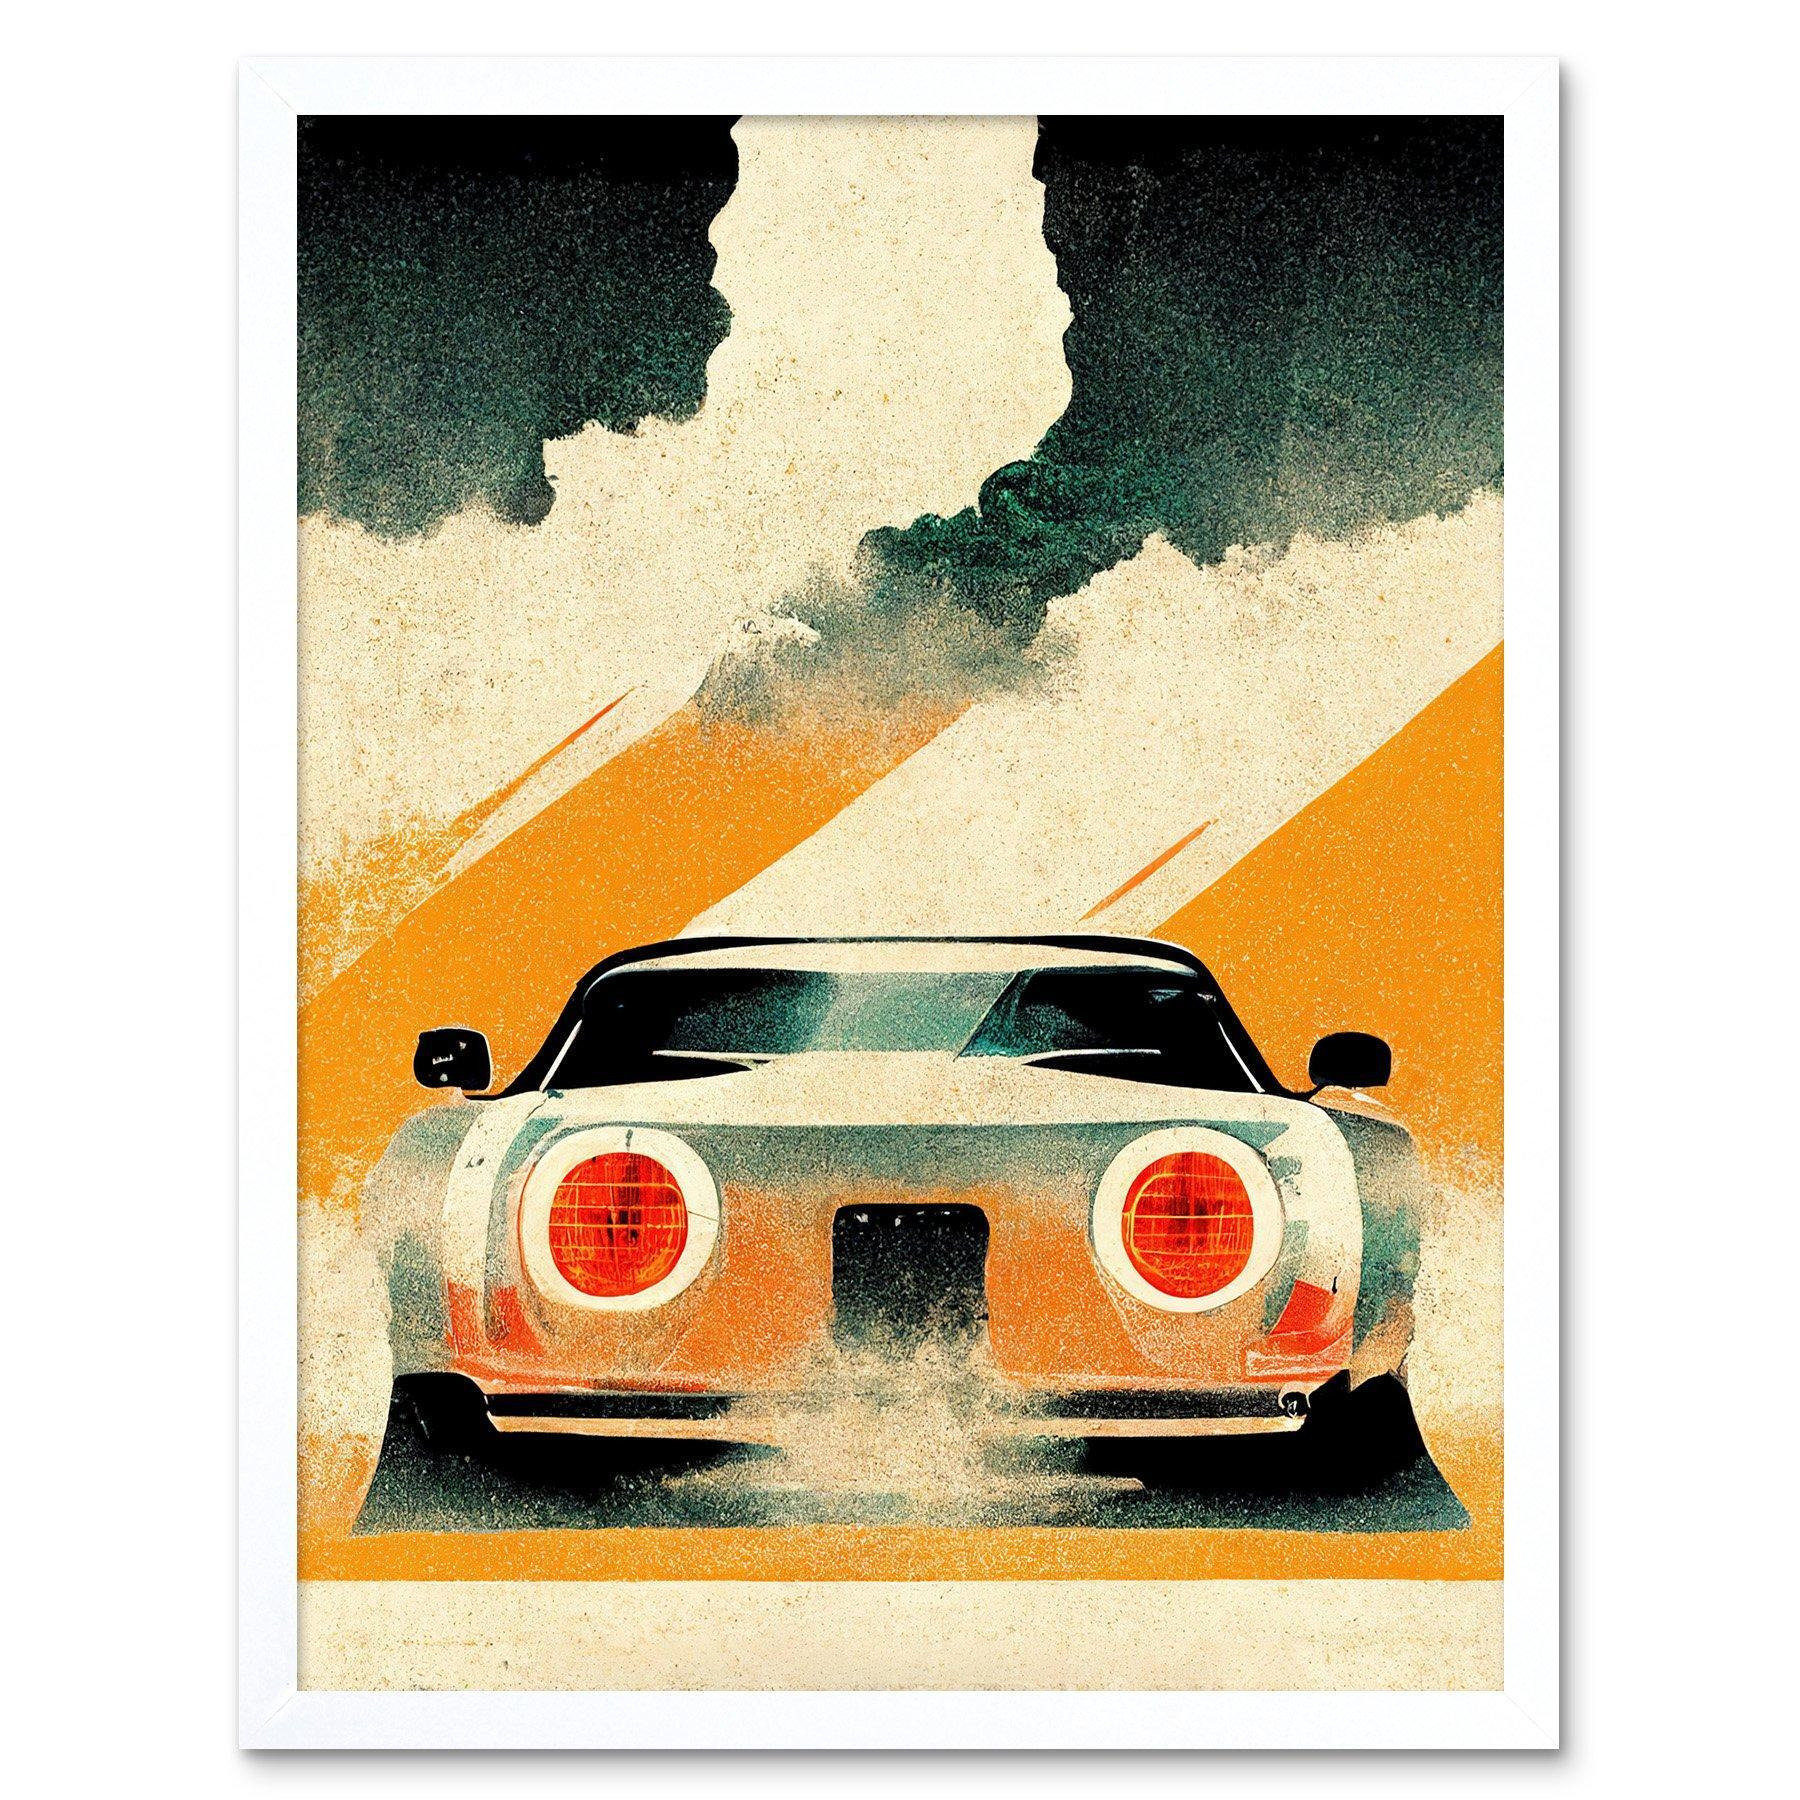 Japanese Sports Car Vintage Vector Yellow Silver Black Art Print Framed Poster Wall Decor 12x16 inch - image 1